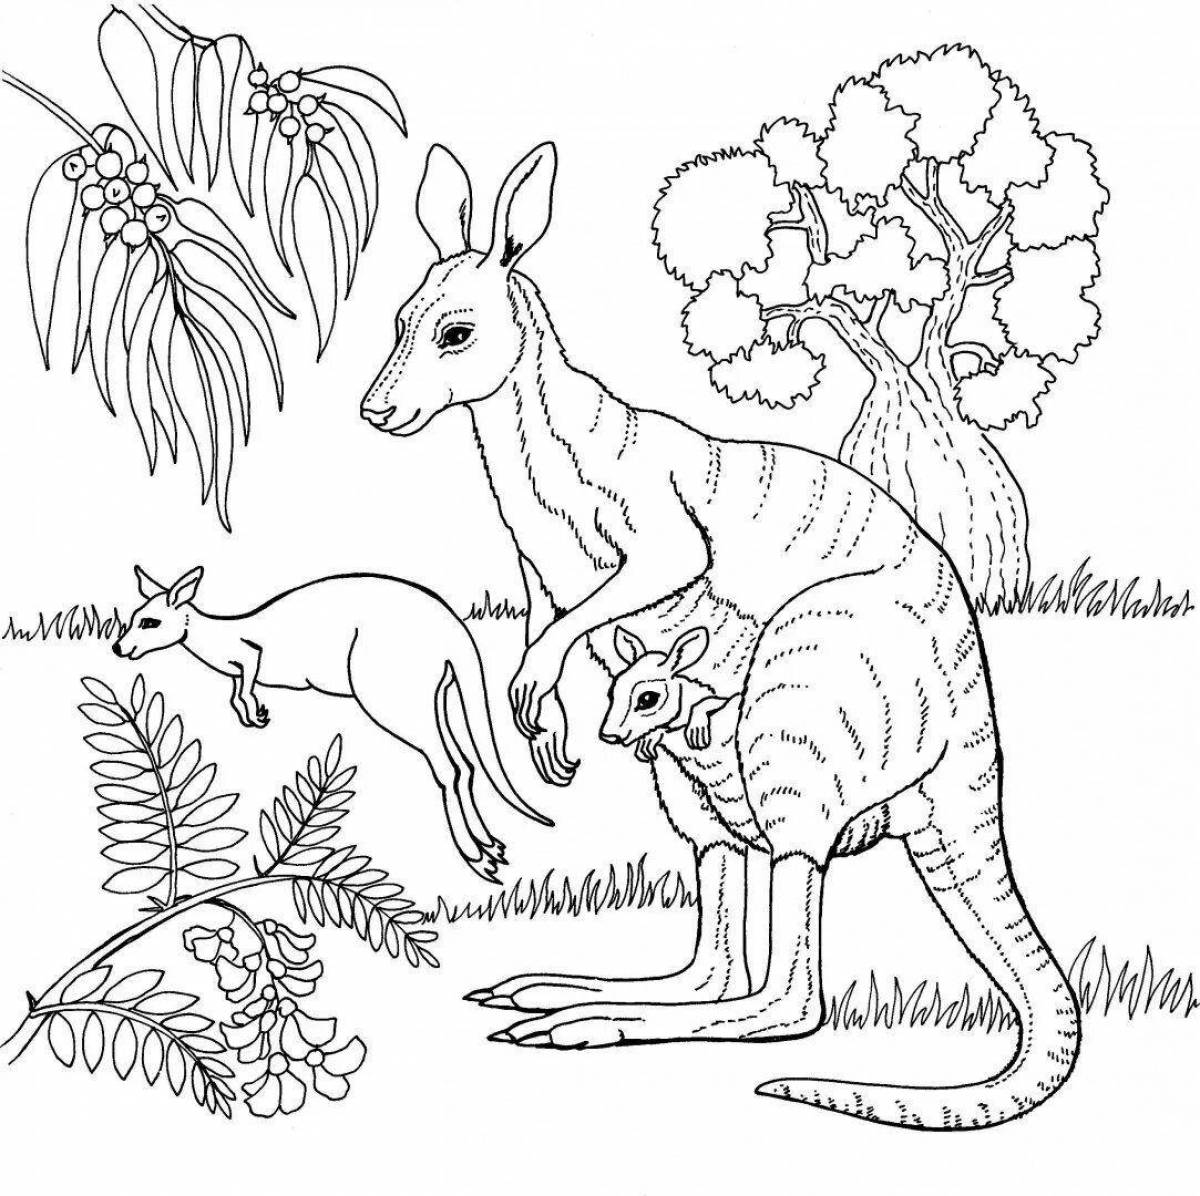 Coloring pages animals of hot countries for children 6-7 years old